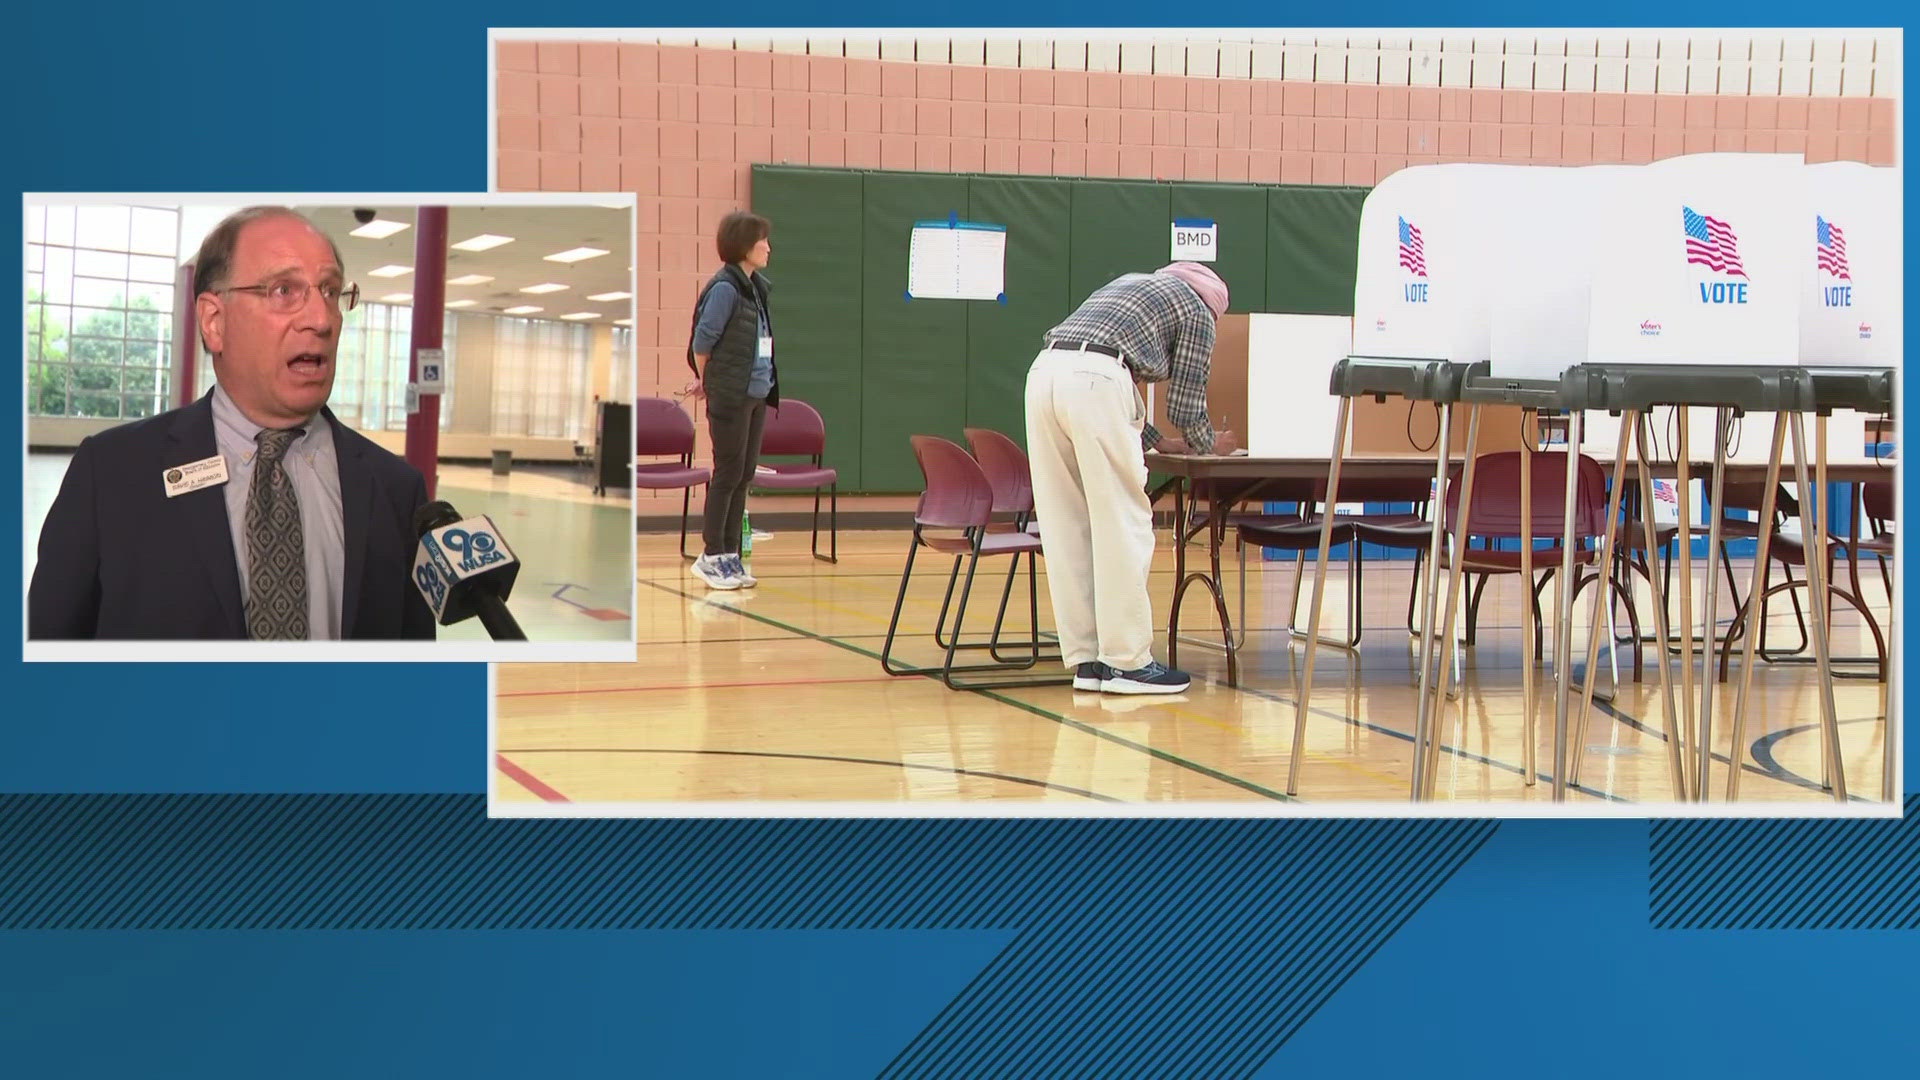 Maryland voters have 4 hours left to vote for Primary Day. And WUSA9 has you covered on all things election.